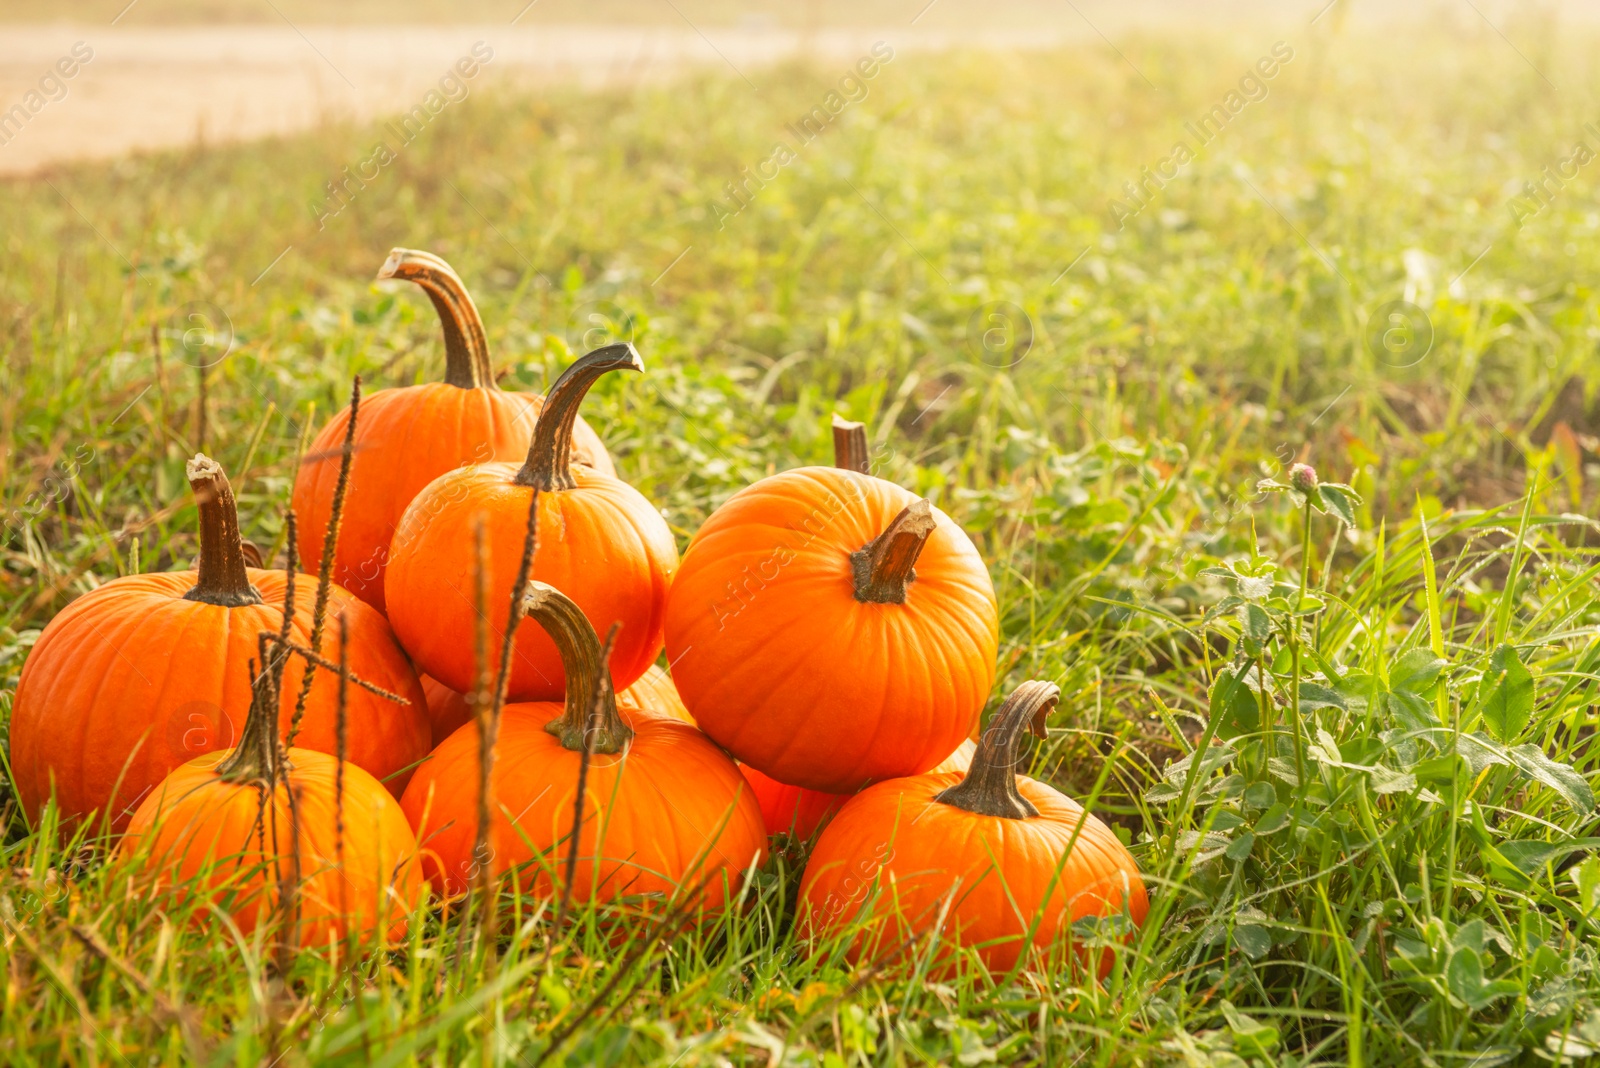 Photo of Many ripe orange pumpkins on green grass outdoors, space for text